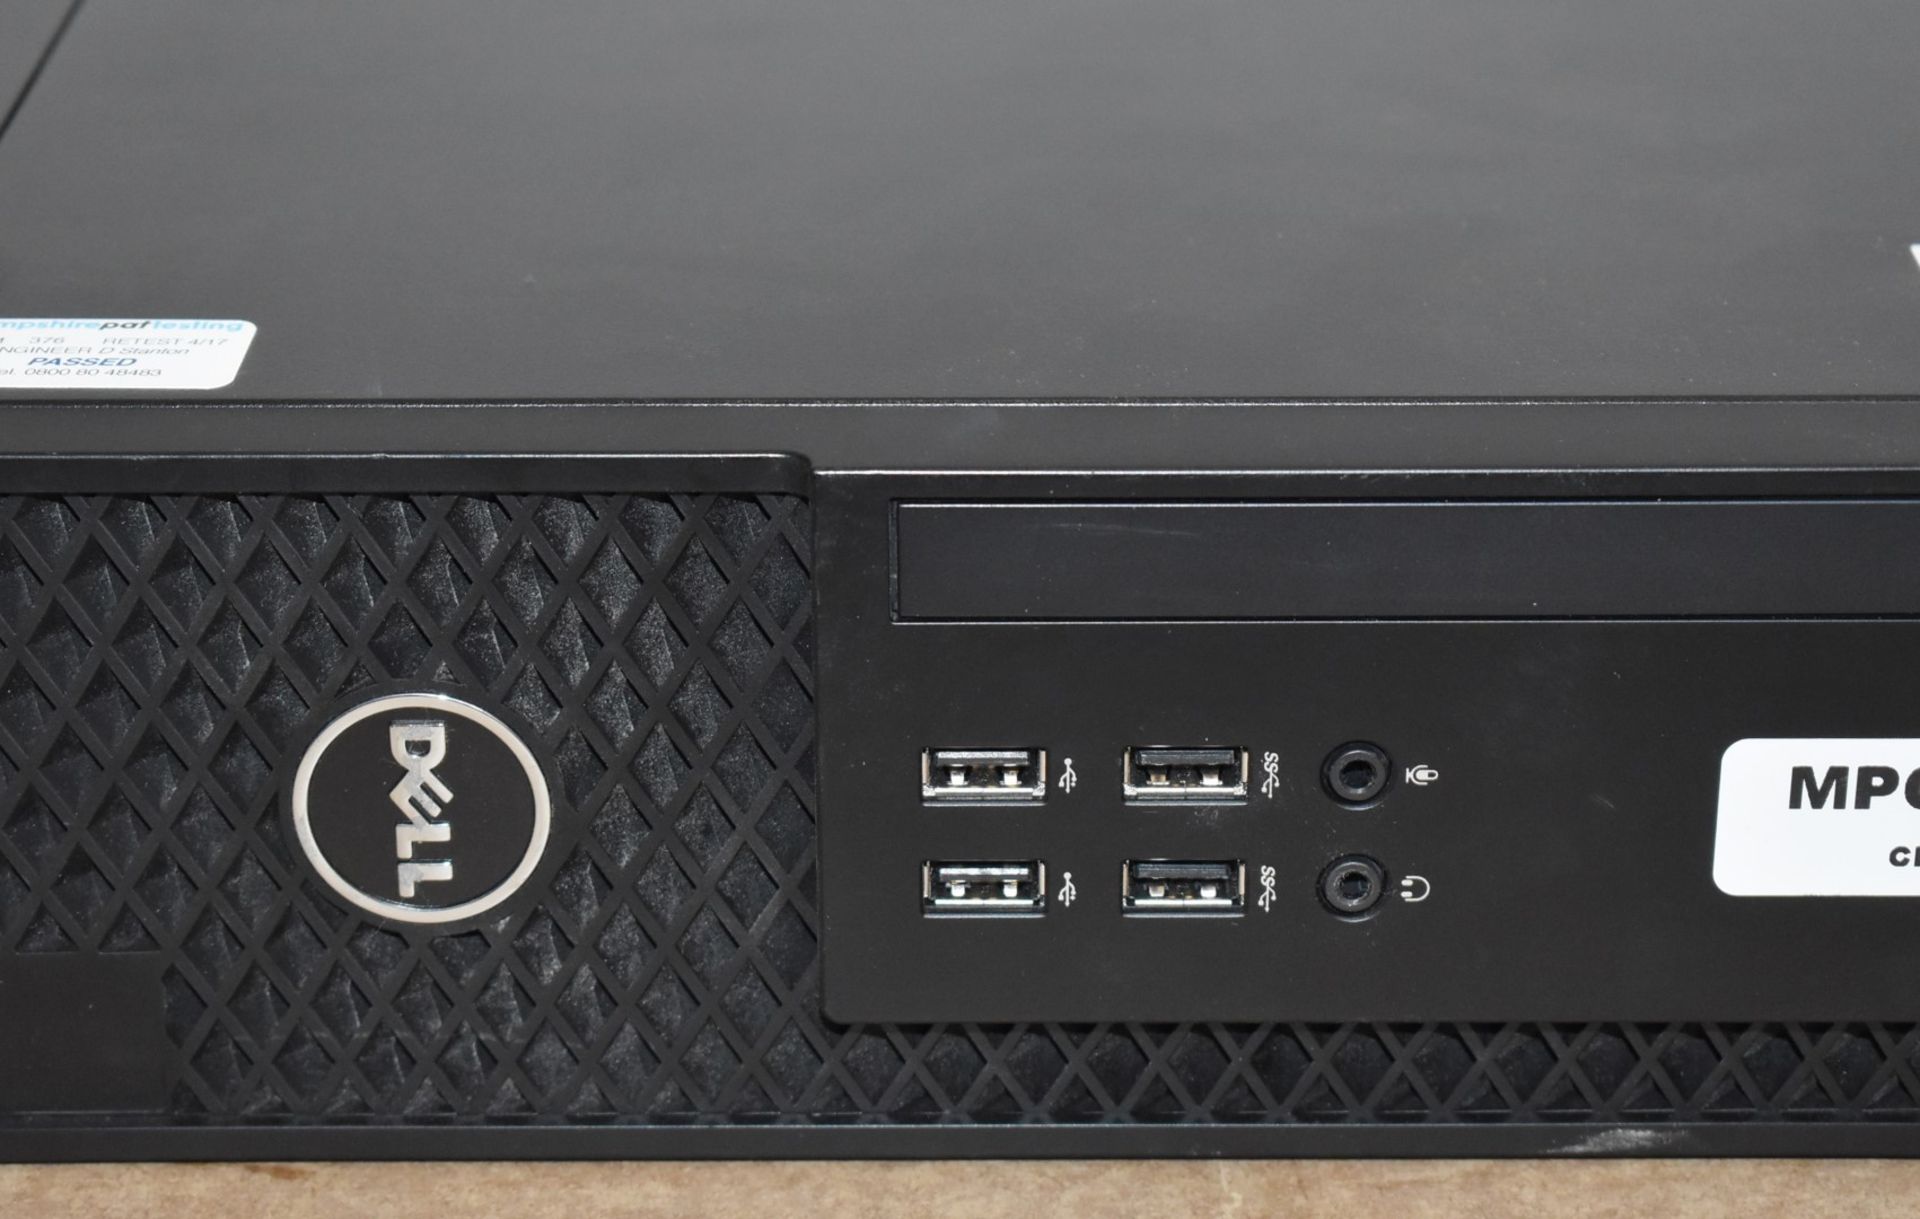 1 x Dell VidyoRoom HD230 SFF Conferencing Base Station Computer - Features an Intel i7-4770 3.4Ghz - Image 8 of 9